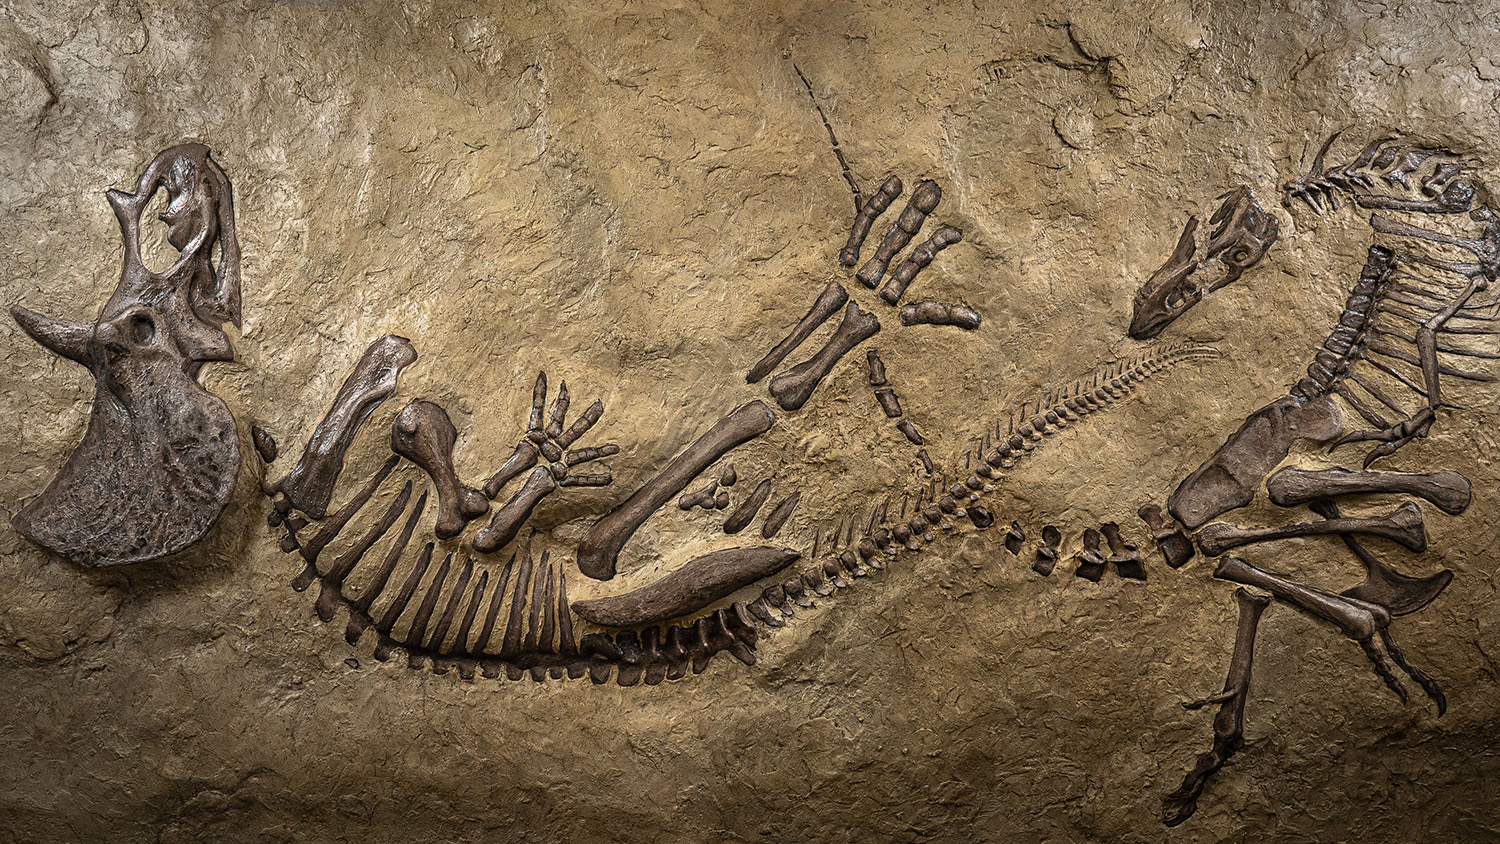 A replica of the "Dueling Dinosaurs" fossil